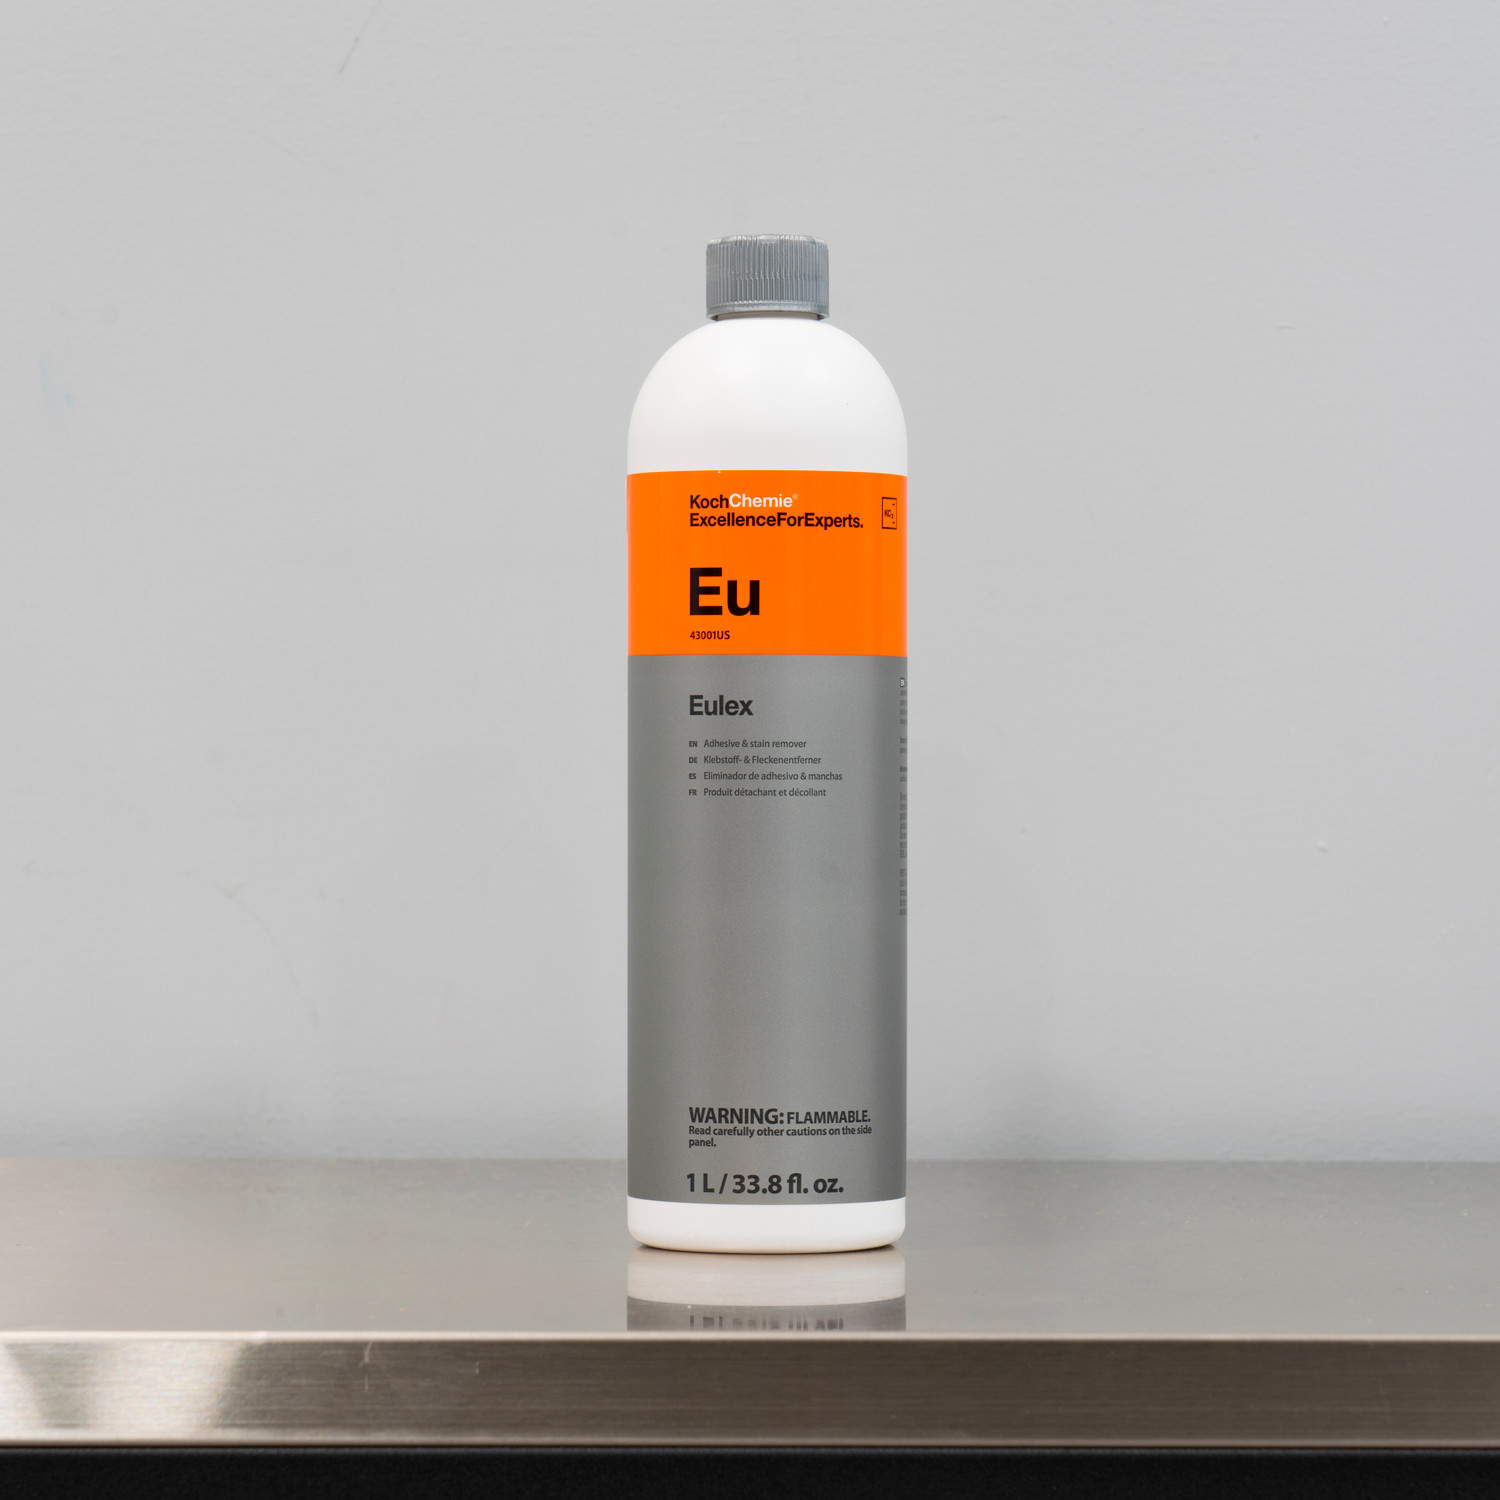 Koch-Chemie - Orange Power - 1 Liter - Adhesive, Tree Resin, and Rubber  Remover; Free from Halogenated Hydrocarbons with a Fresh Orange Fragrance